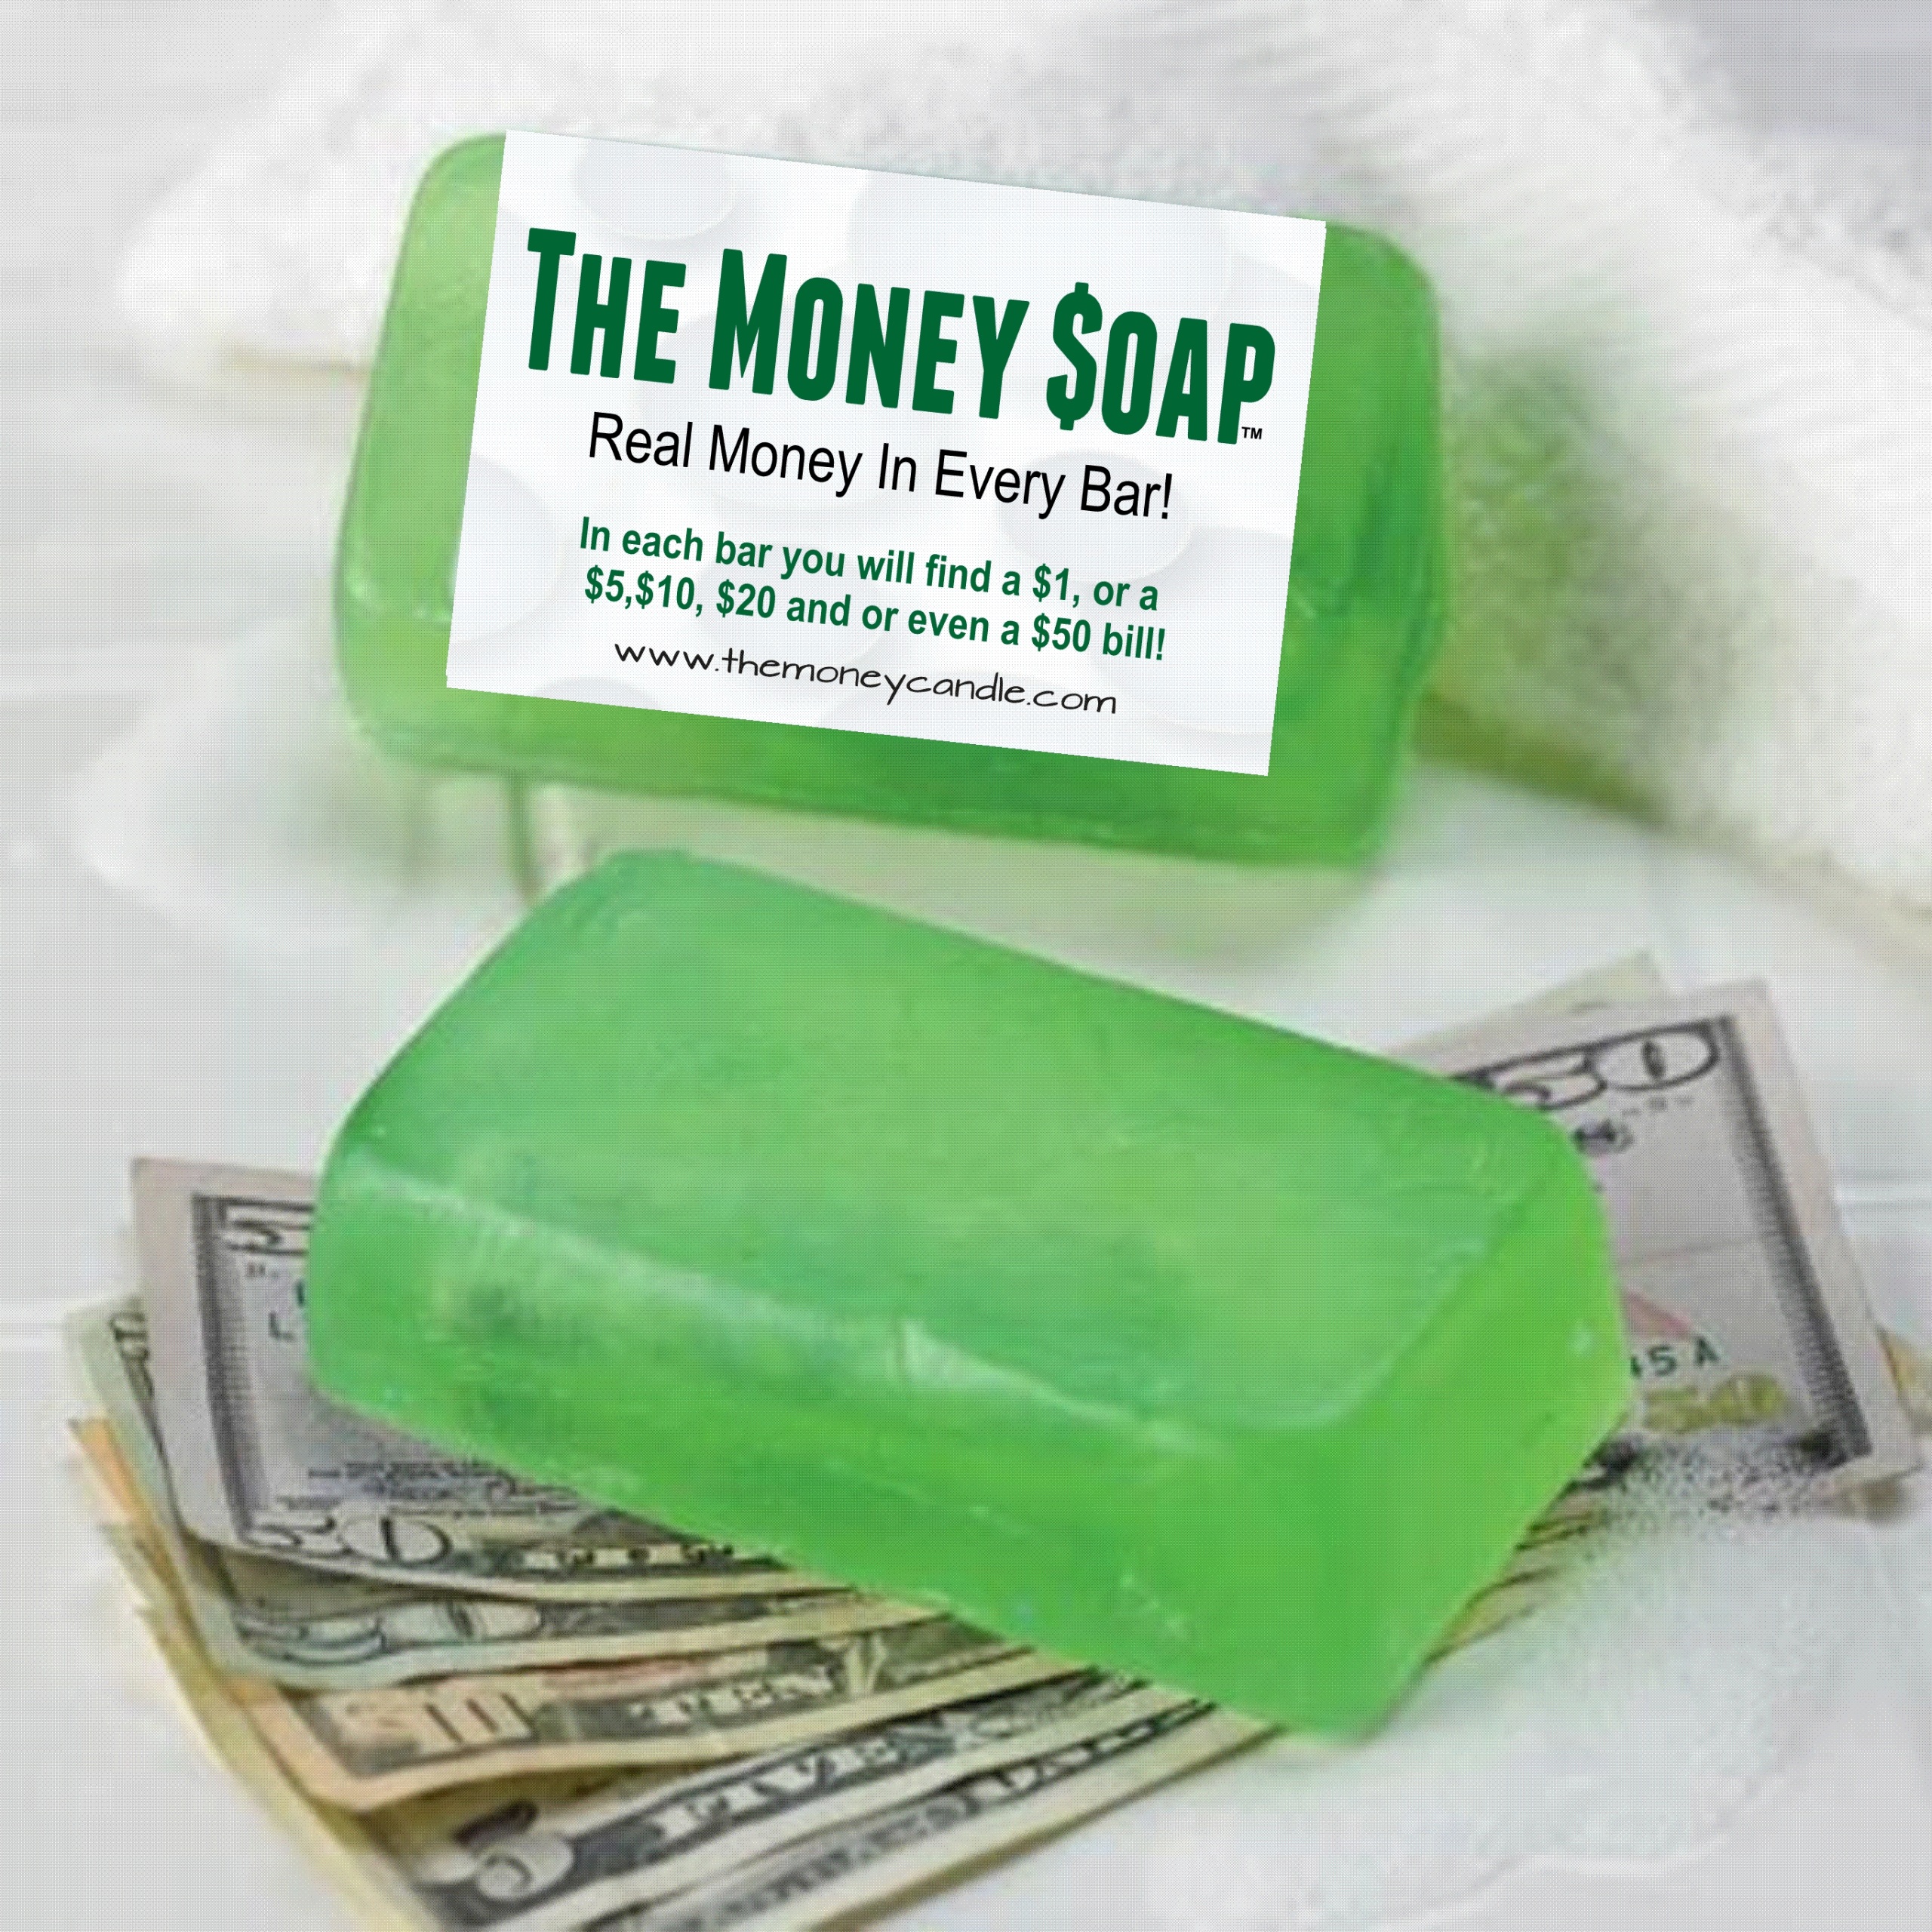 Just made $100 bill duck money soap. Who will get it? Link in bio to order.  #duckmoneysoap #moneysoapchallenge #moneysoap #moneysoaps, By themoneysoap